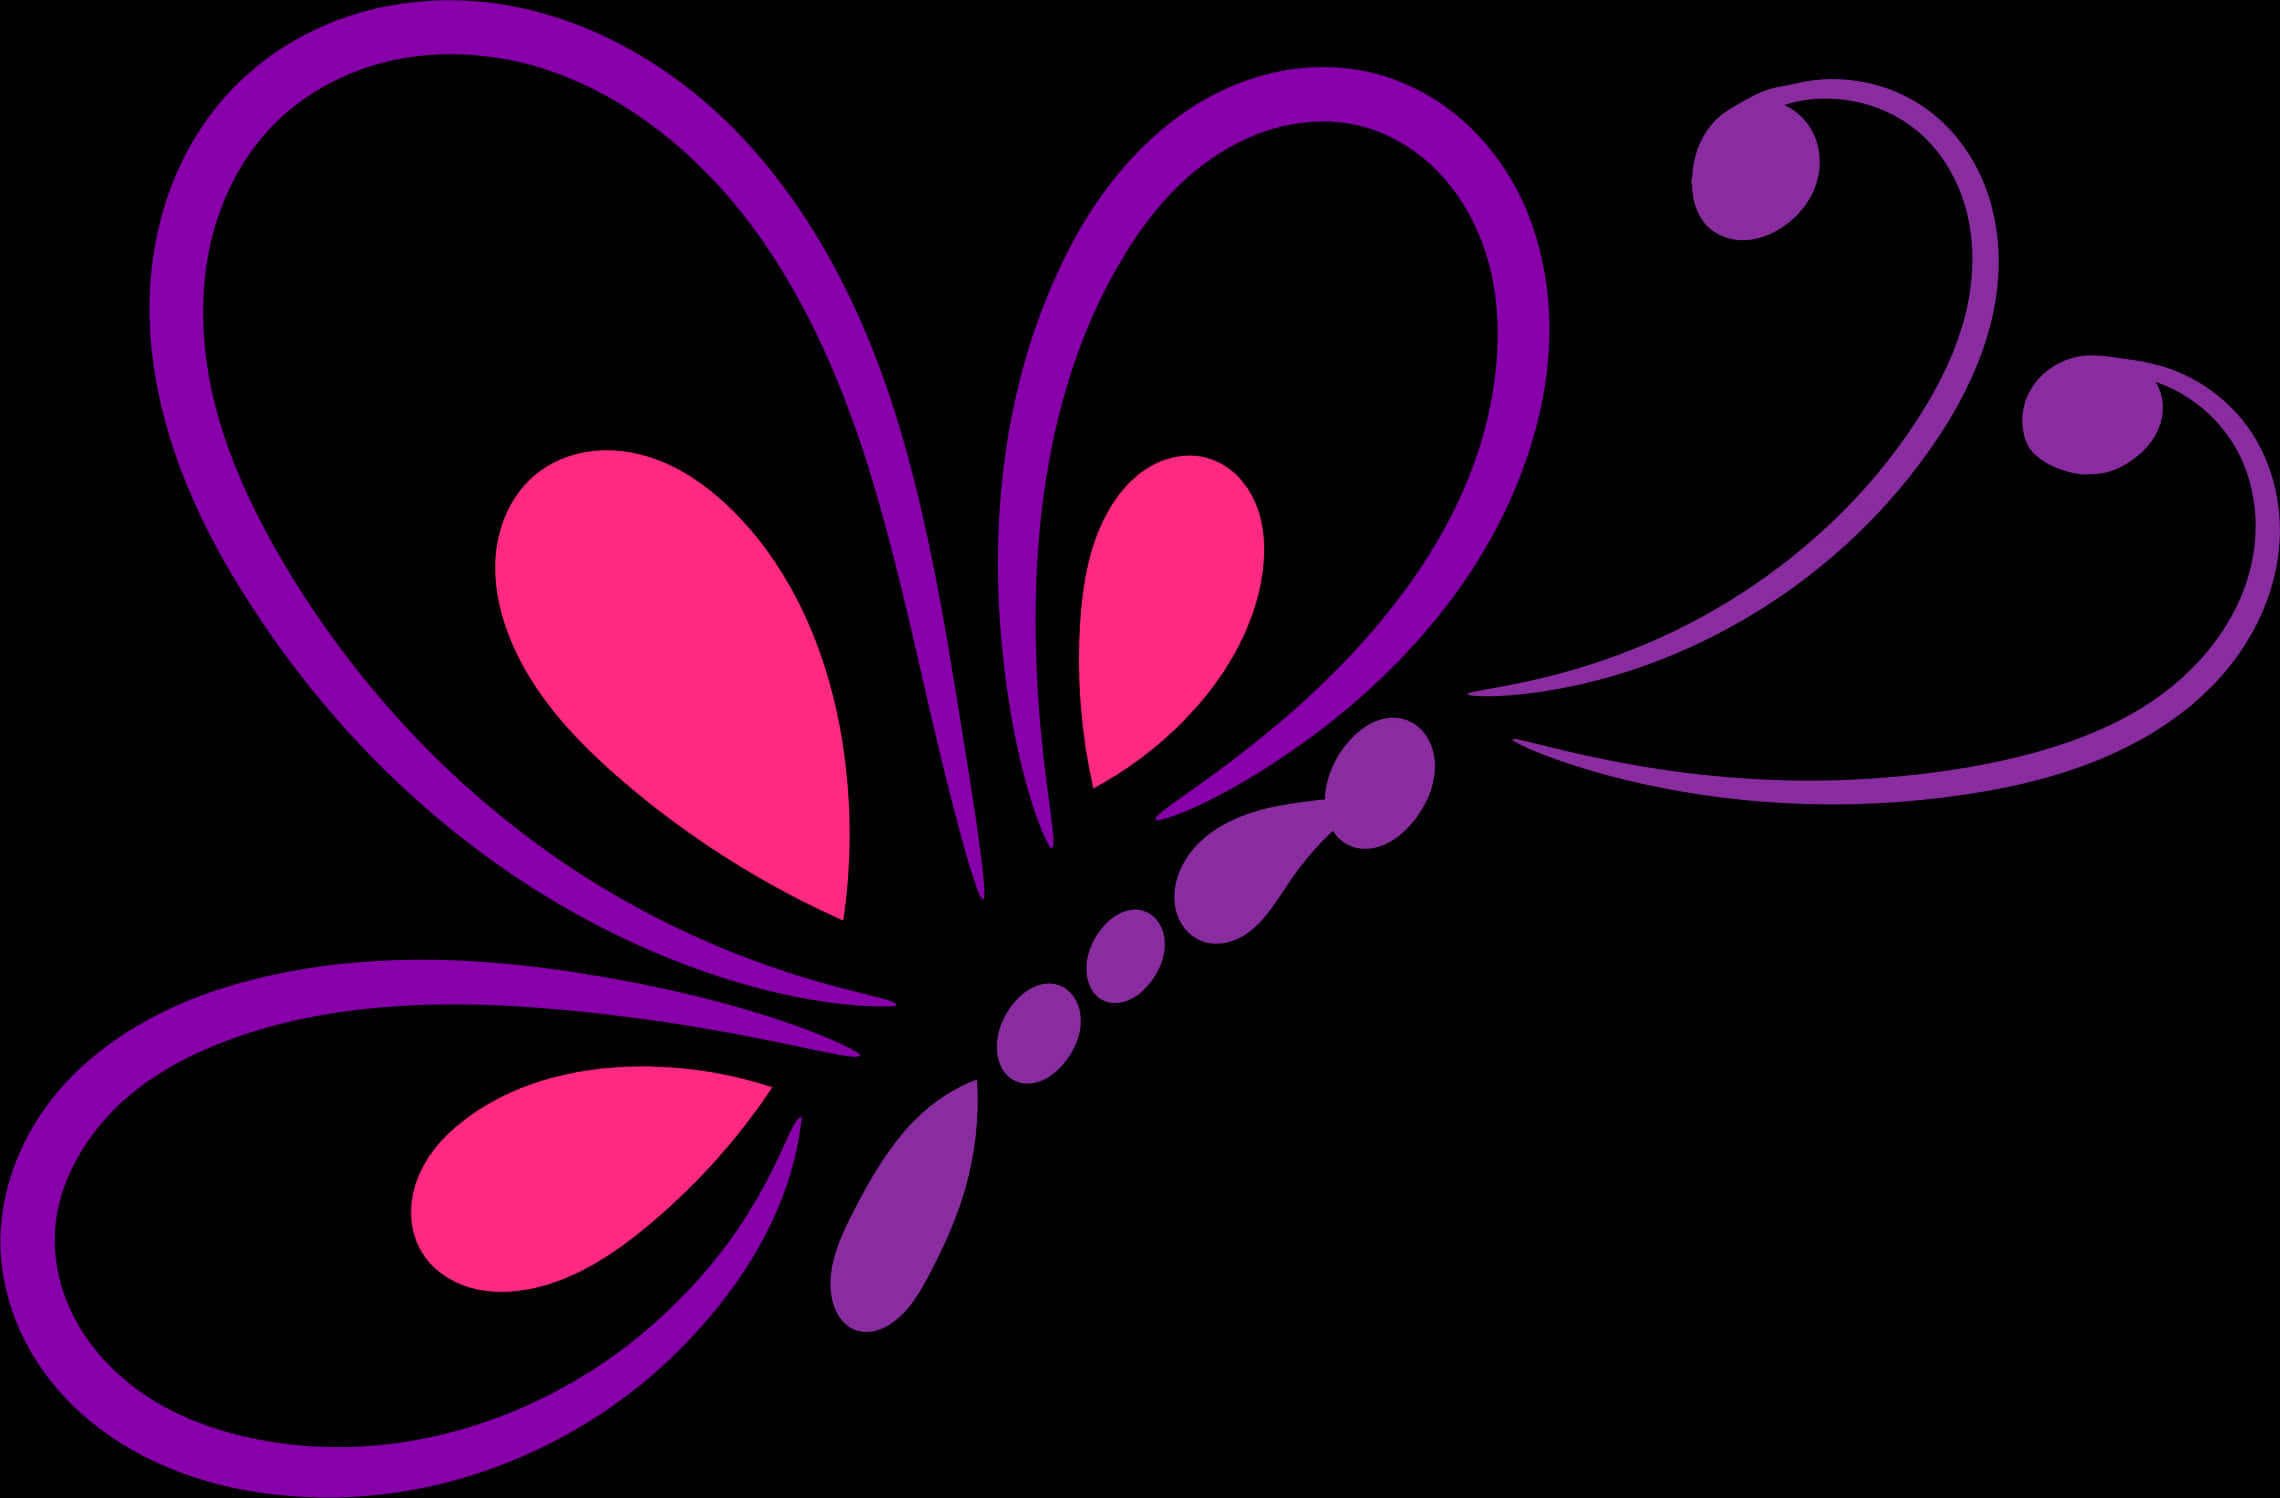 A Butterfly With Pink And Purple Swirls